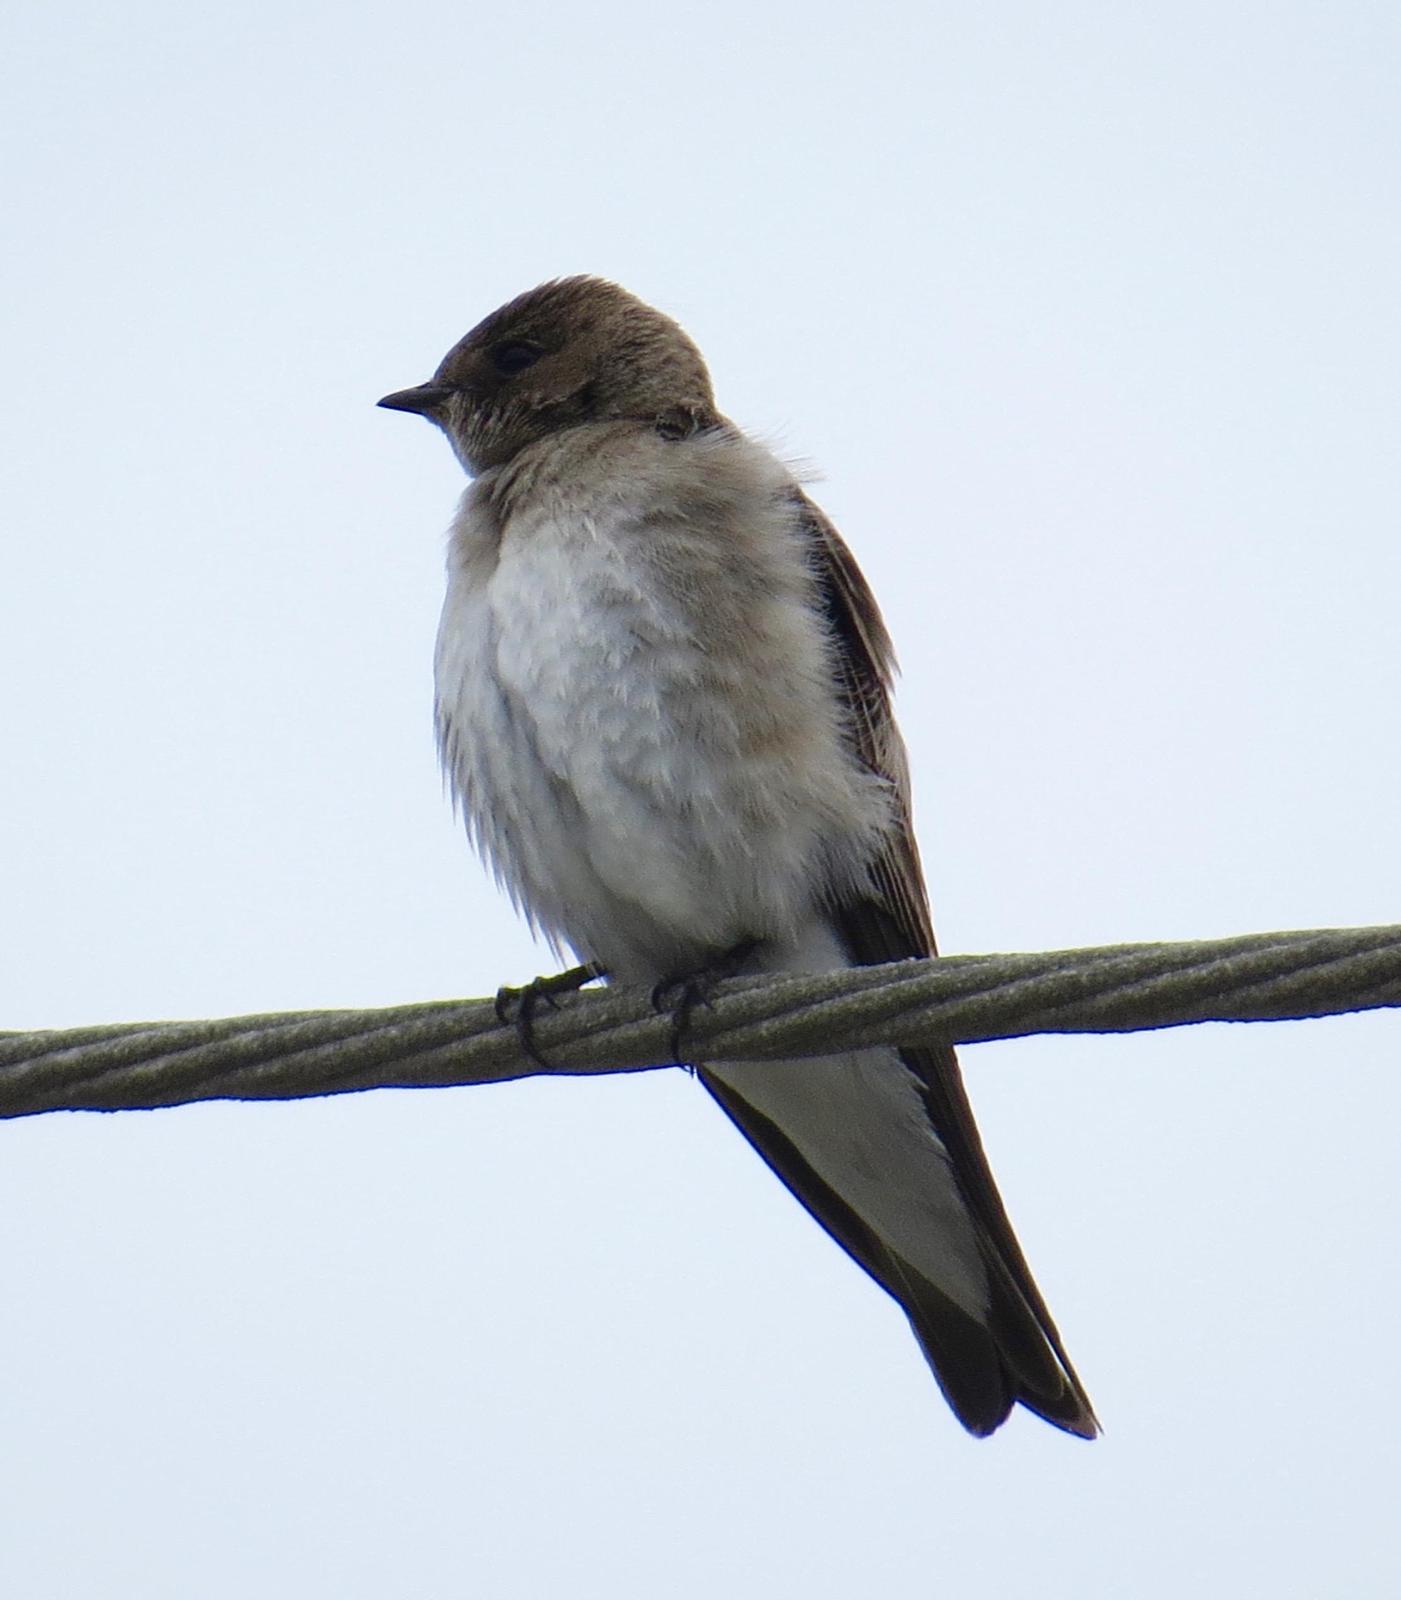 Northern Rough-winged Swallow Photo by Don Glasco